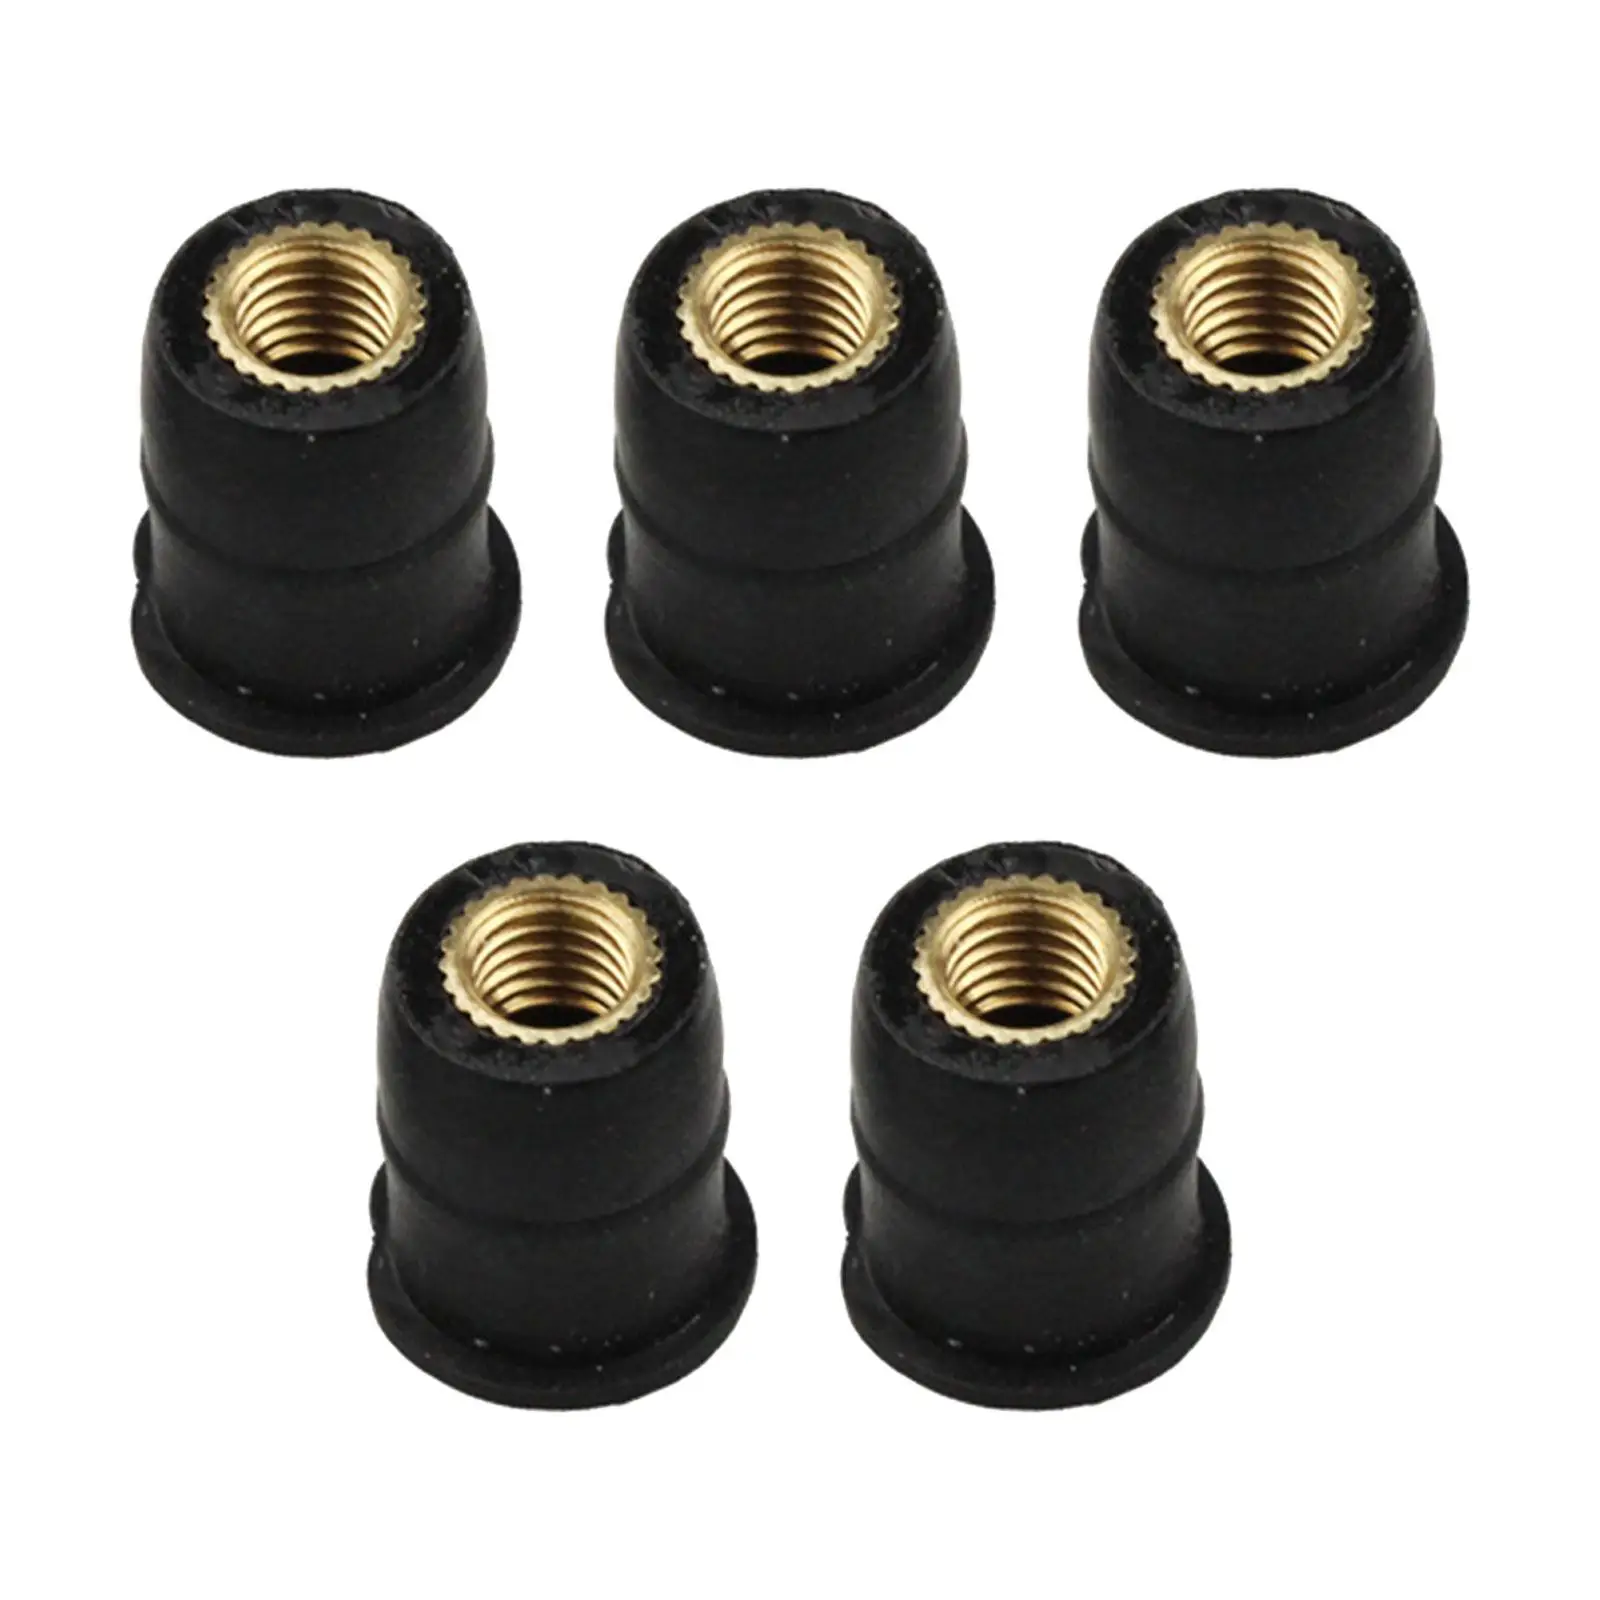 5x Windshield Well Nut Motorcycle Accessories Brass Nut for Kayak Canoe